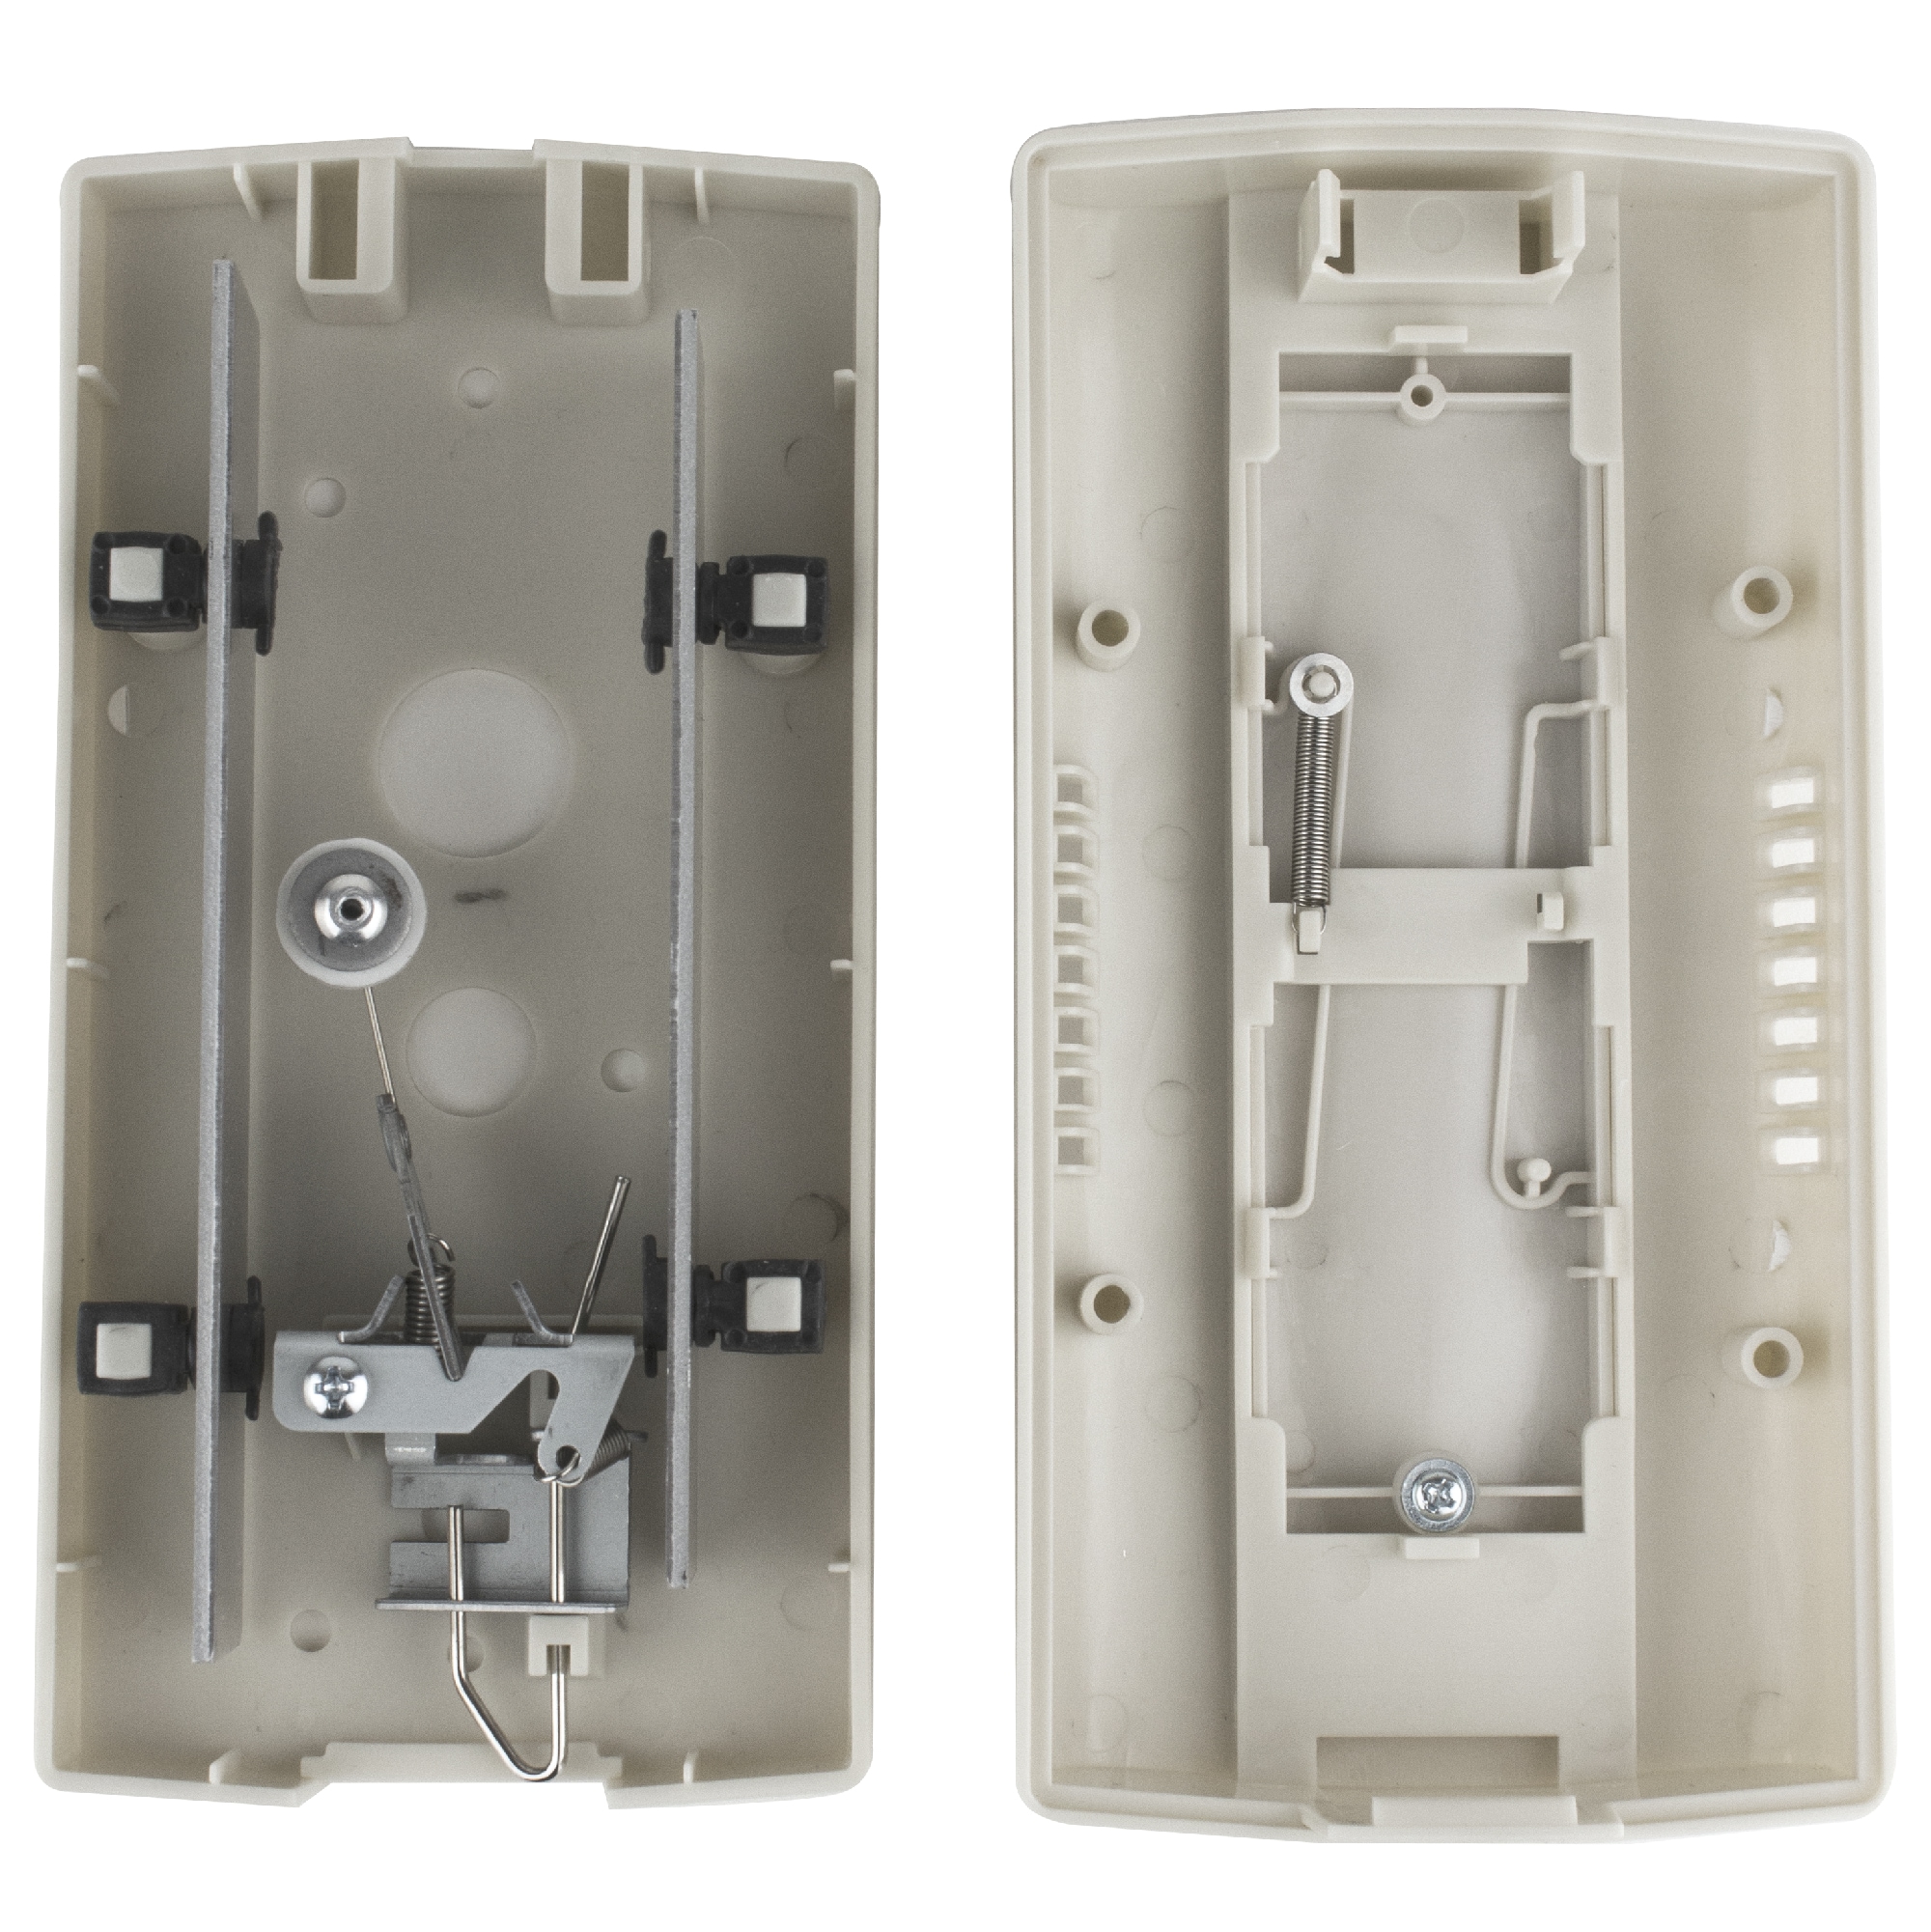 Newhouse Hardware Wireless Door Chime Kit with Remote, 150 ft. Operating Range, Push Button, 32 Chimes, White Wcmp